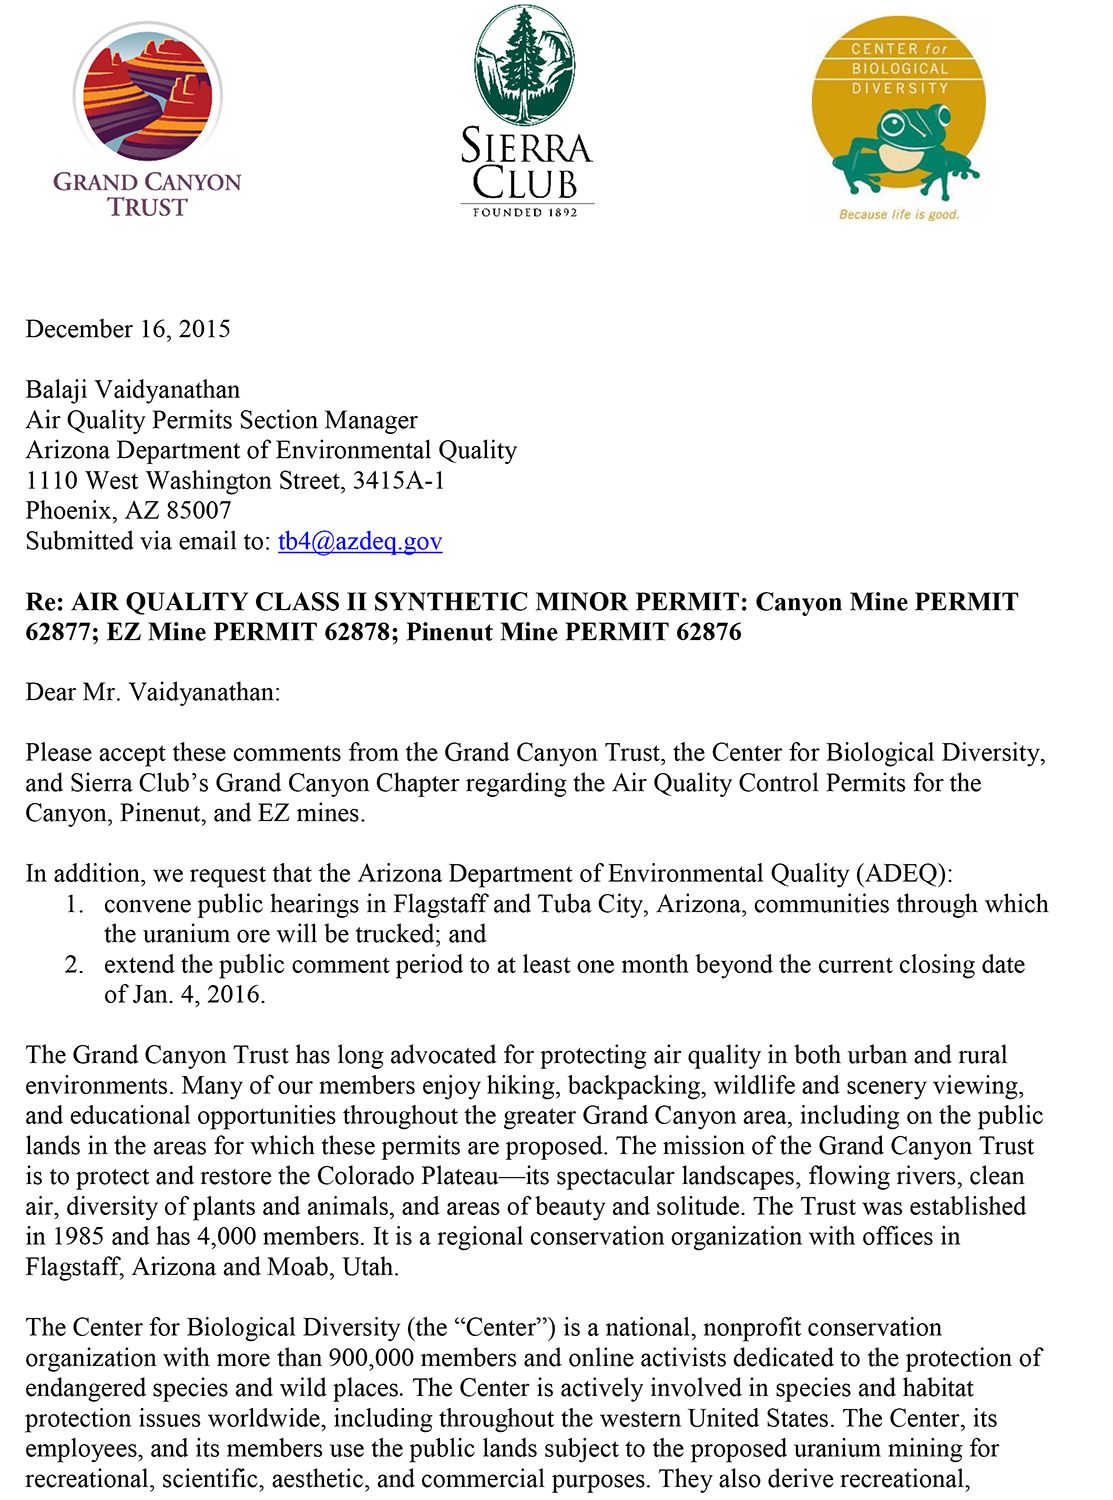 Comments on air quality permit renewals